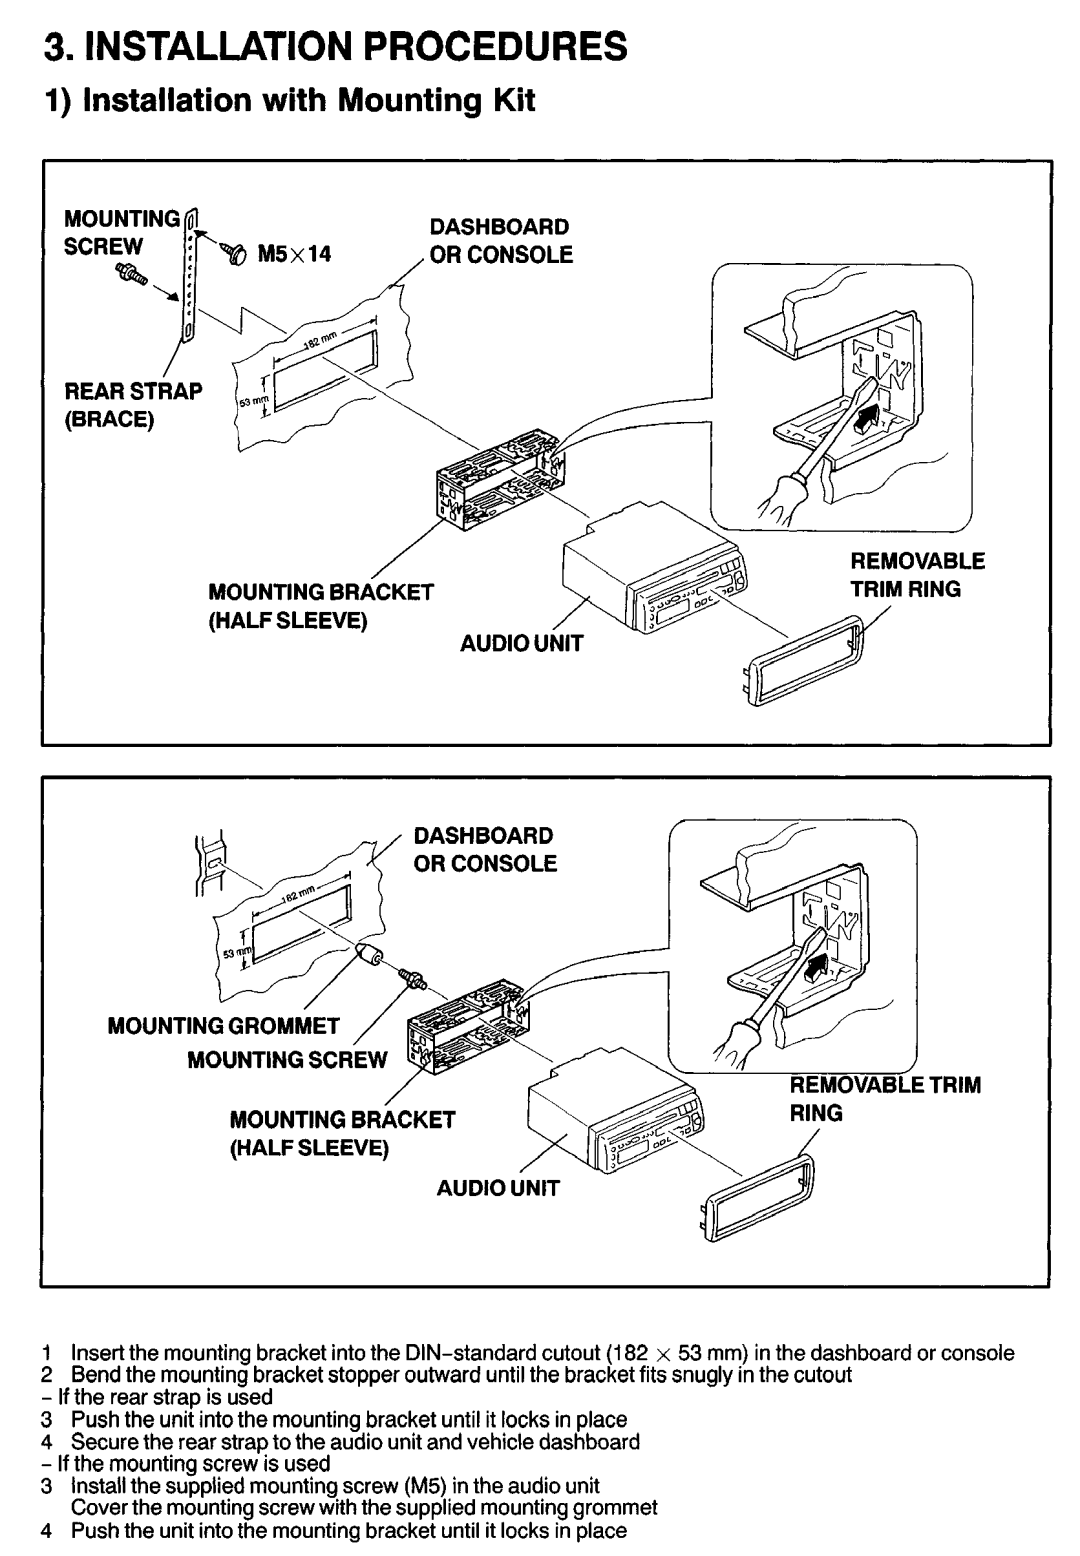 Sanyo FXCD-500 manual Installation Procedures, Installation with Mounting Kit 